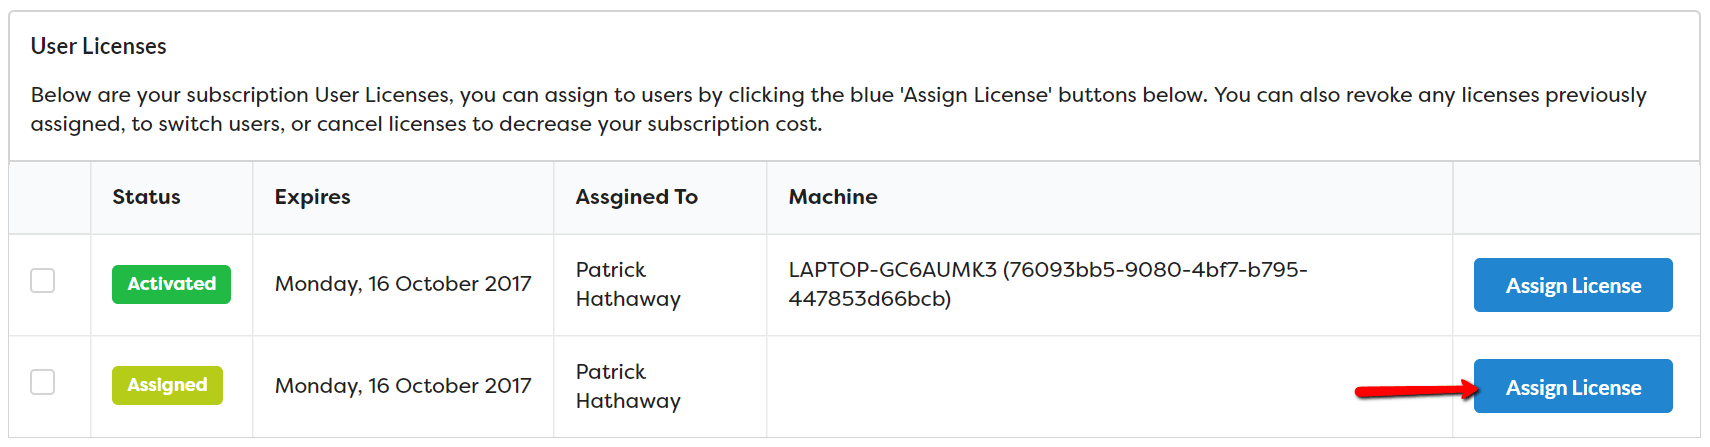 Assign Free Licenses